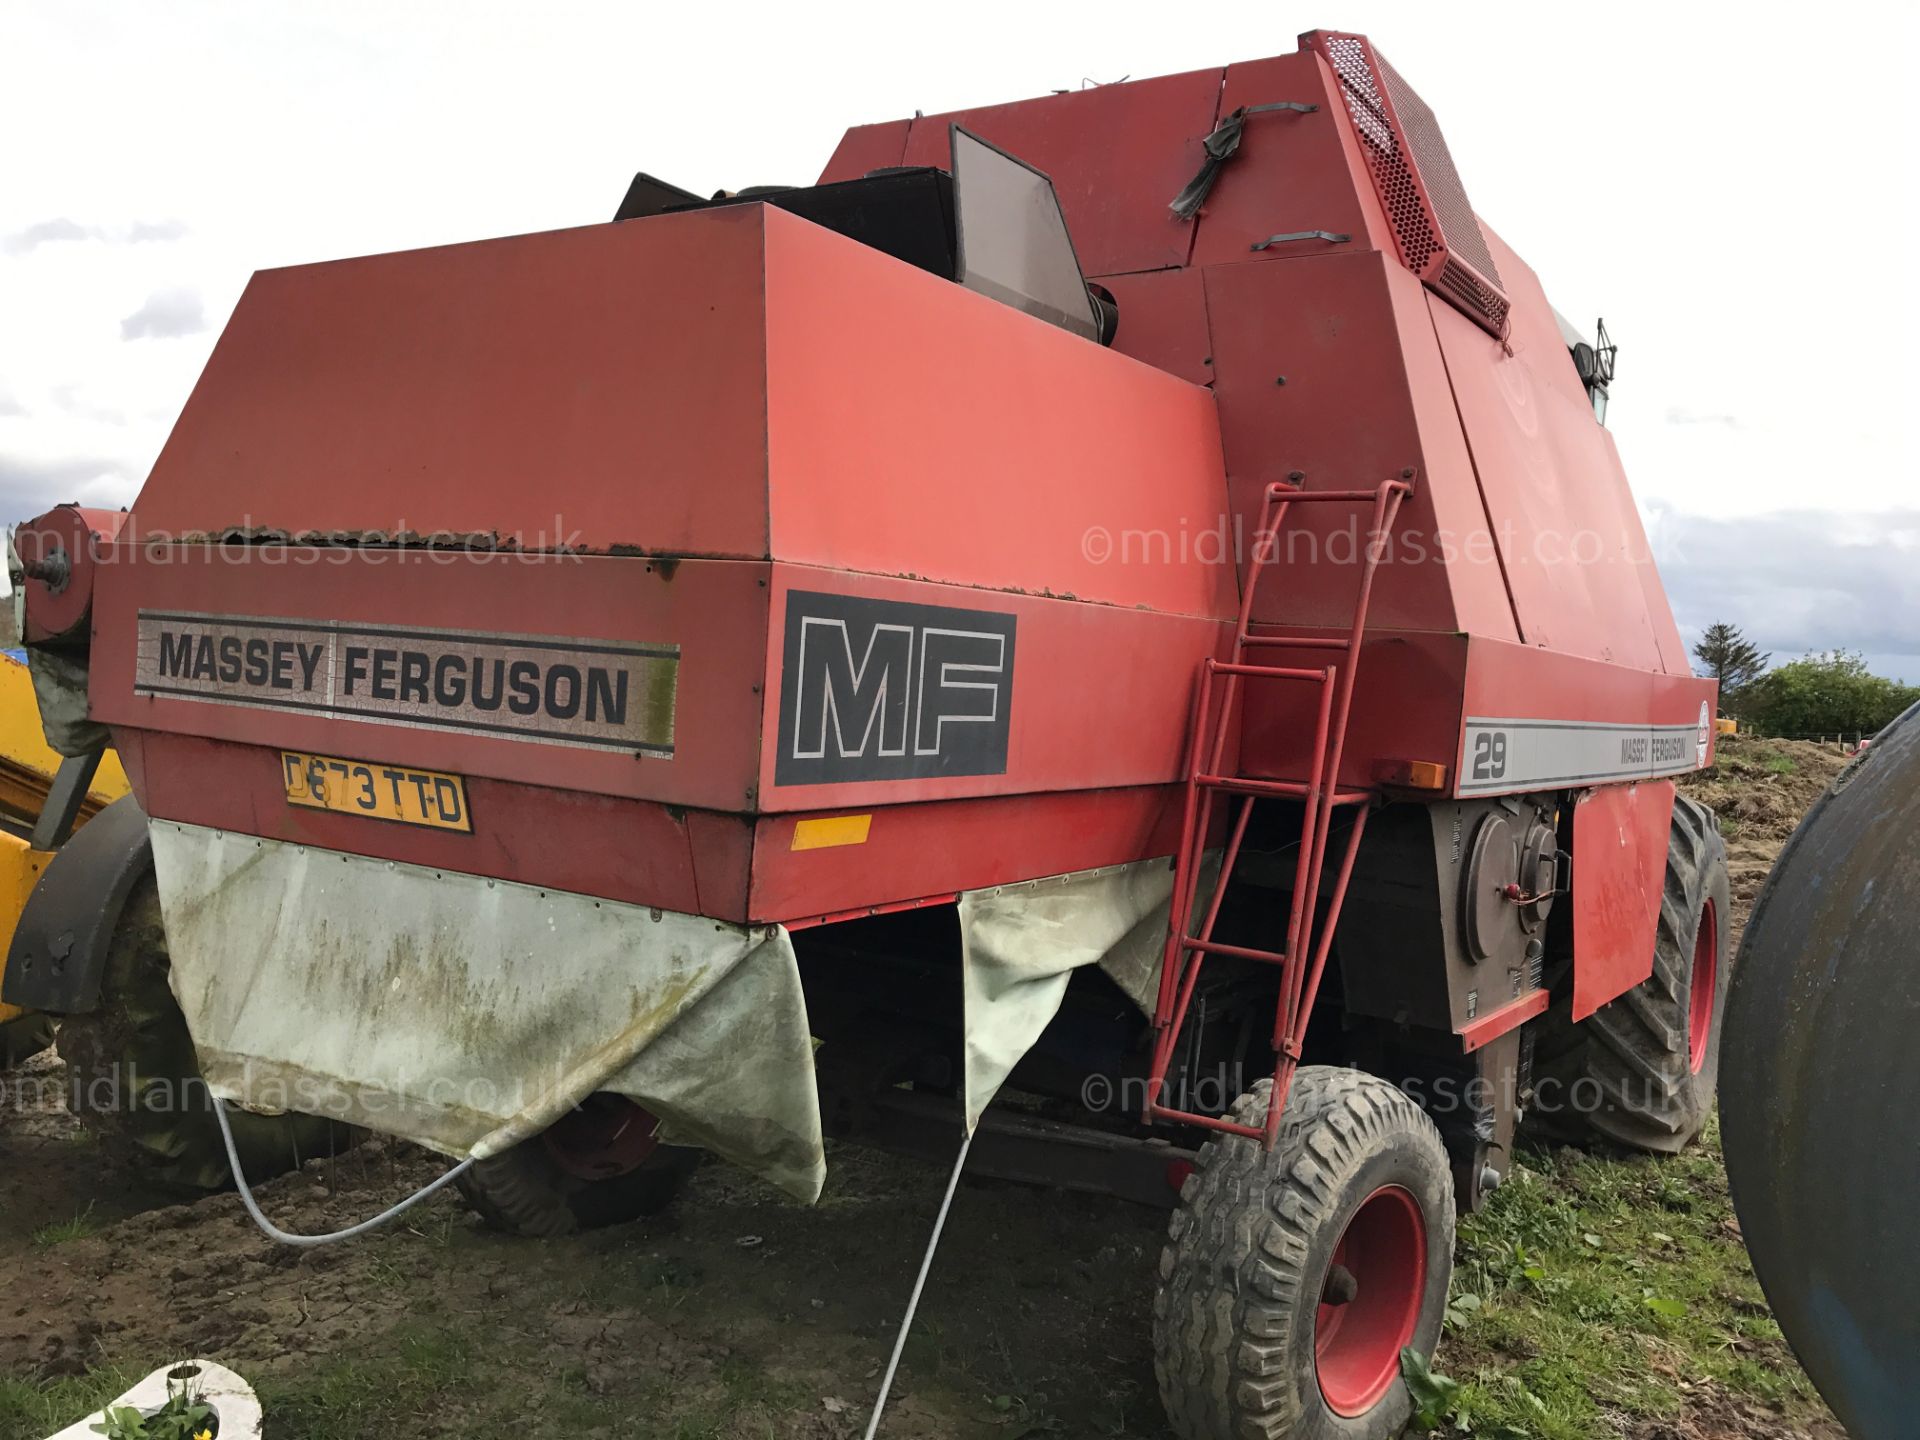 MASSEY FERGUSON COMBINE HARVESTER   YEAR UNKNOWN COMPLETE WITH HEADER AND TRAILER HOURS UNKNOWN GOOD - Image 7 of 7